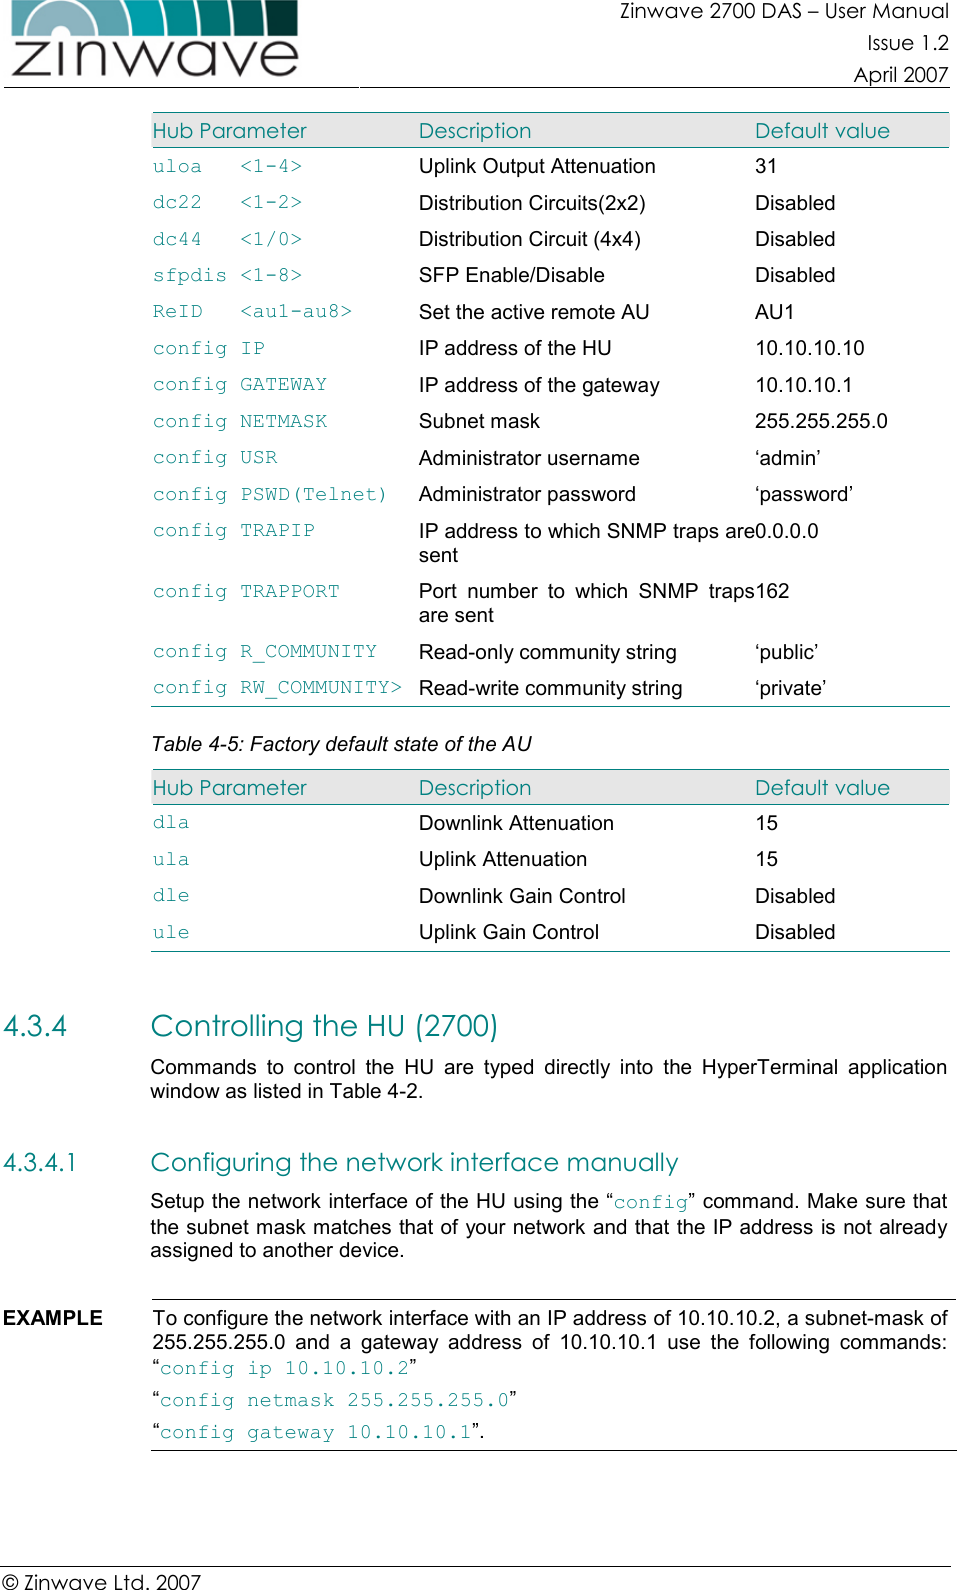 Zinwave 2700 DAS – User Manual Issue 1.2  April 2007  © Zinwave Ltd. 2007  Hub Parameter  Description  Default value uloa   &lt;1-4&gt;   Uplink Output Attenuation  31 dc22   &lt;1-2&gt;   Distribution Circuits(2x2)  Disabled dc44   &lt;1/0&gt;                      Distribution Circuit (4x4)  Disabled sfpdis &lt;1-8&gt;  SFP Enable/Disable  Disabled ReID   &lt;au1-au8&gt;                      Set the active remote AU  AU1 config IP    IP address of the HU  10.10.10.10 config GATEWAY   IP address of the gateway  10.10.10.1 config NETMASK   Subnet mask  255.255.255.0 config USR   Administrator username  ‘admin’ config PSWD(Telnet)   Administrator password  ‘password’ config TRAPIP  IP address to which SNMP traps are sent 0.0.0.0 config TRAPPORT  Port  number  to  which  SNMP  traps are sent 162 config R_COMMUNITY   Read-only community string  ‘public’ config RW_COMMUNITY&gt;  Read-write community string  ‘private’ Table 4-5: Factory default state of the AU Hub Parameter  Description  Default value dla  Downlink Attenuation  15 ula  Uplink Attenuation  15 dle  Downlink Gain Control  Disabled ule                      Uplink Gain Control  Disabled  4.3.4 Controlling the HU (2700) Commands  to  control  the  HU  are  typed  directly  into  the  HyperTerminal  application window as listed in Table 4-2.  4.3.4.1 Configuring the network interface manually Setup the network interface of the HU using the “config” command. Make sure that the subnet mask matches that of your network and that the IP address is not already assigned to another device.  EXAMPLE  To configure the network interface with an IP address of 10.10.10.2, a subnet-mask of 255.255.255.0  and  a  gateway  address  of  10.10.10.1  use  the  following  commands: “config ip 10.10.10.2” “config netmask 255.255.255.0” “config gateway 10.10.10.1”.  